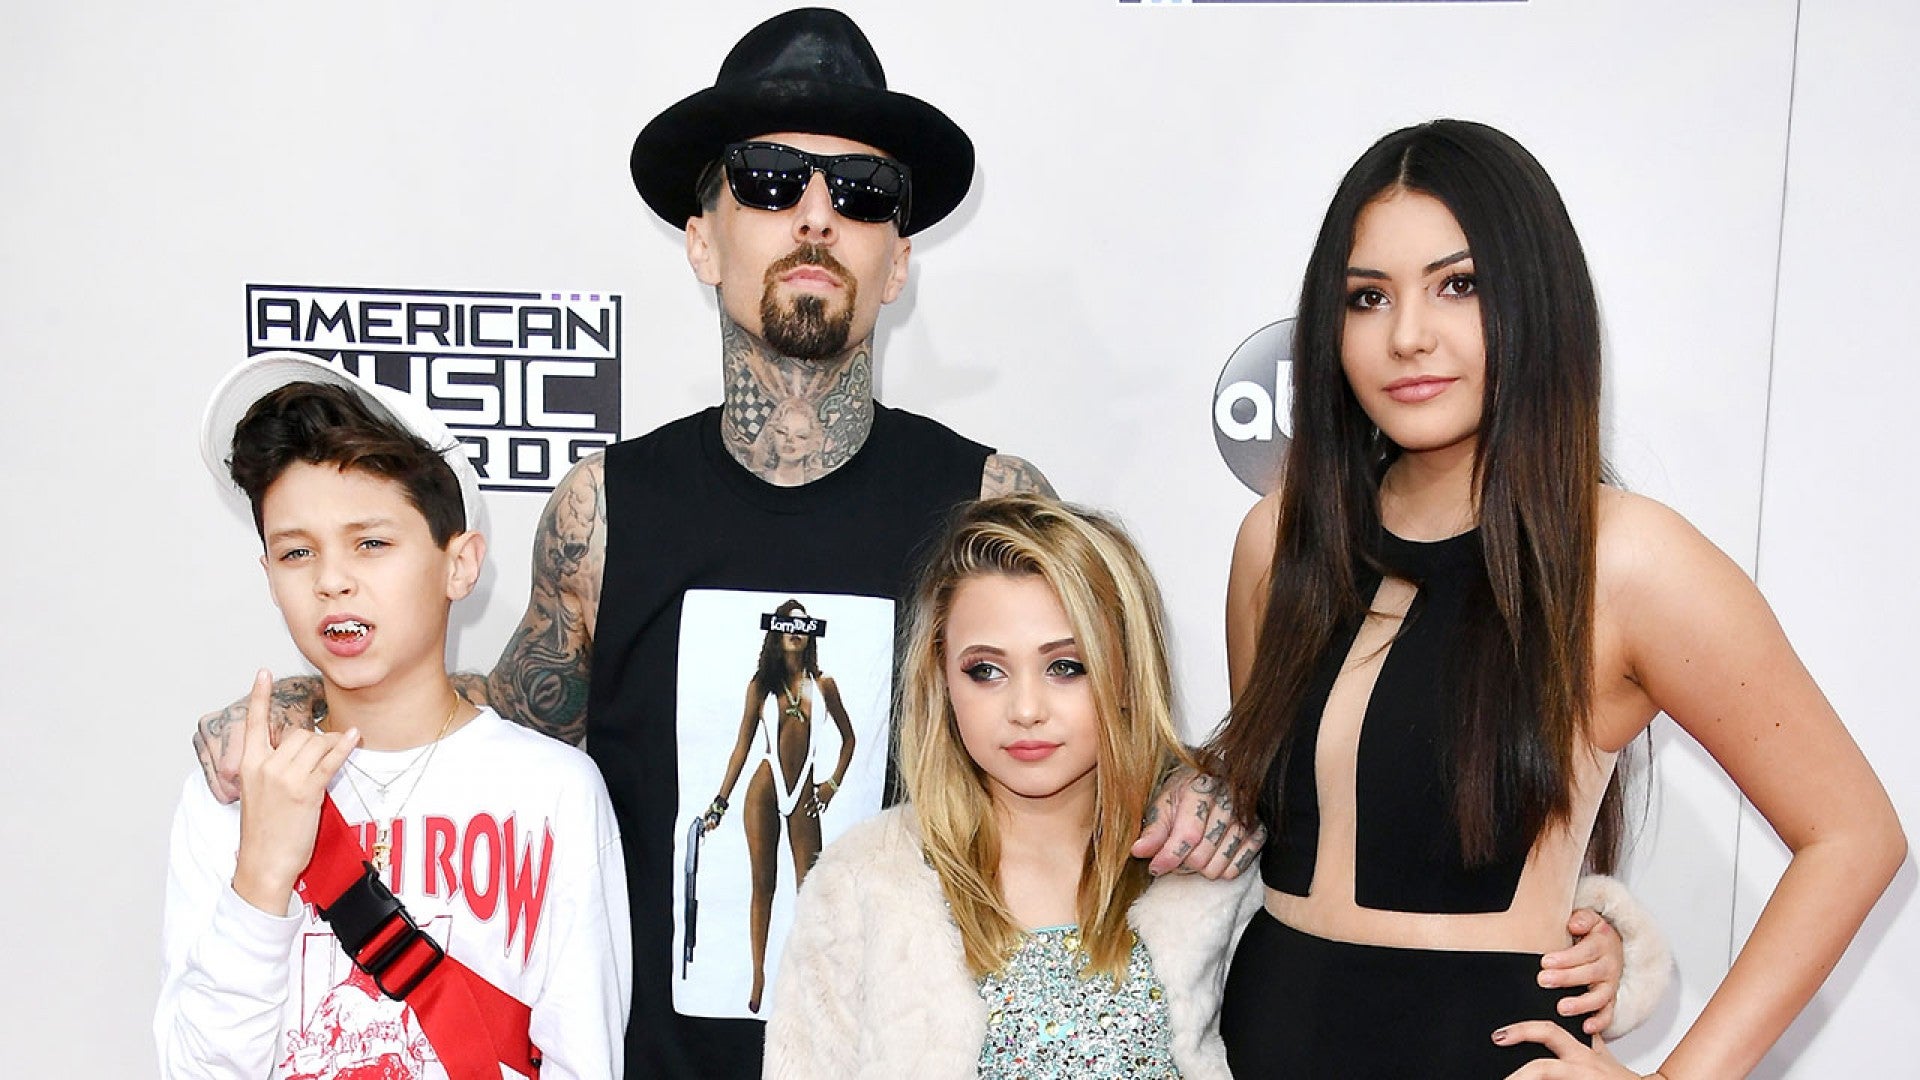 Exclusive Travis Barker Brings His Adorable Kids To The Amas This Is My Support Group Entertainment Tonight Travis barkers drum stick from slc concert in 2004. exclusive travis barker s kids gush over their dad